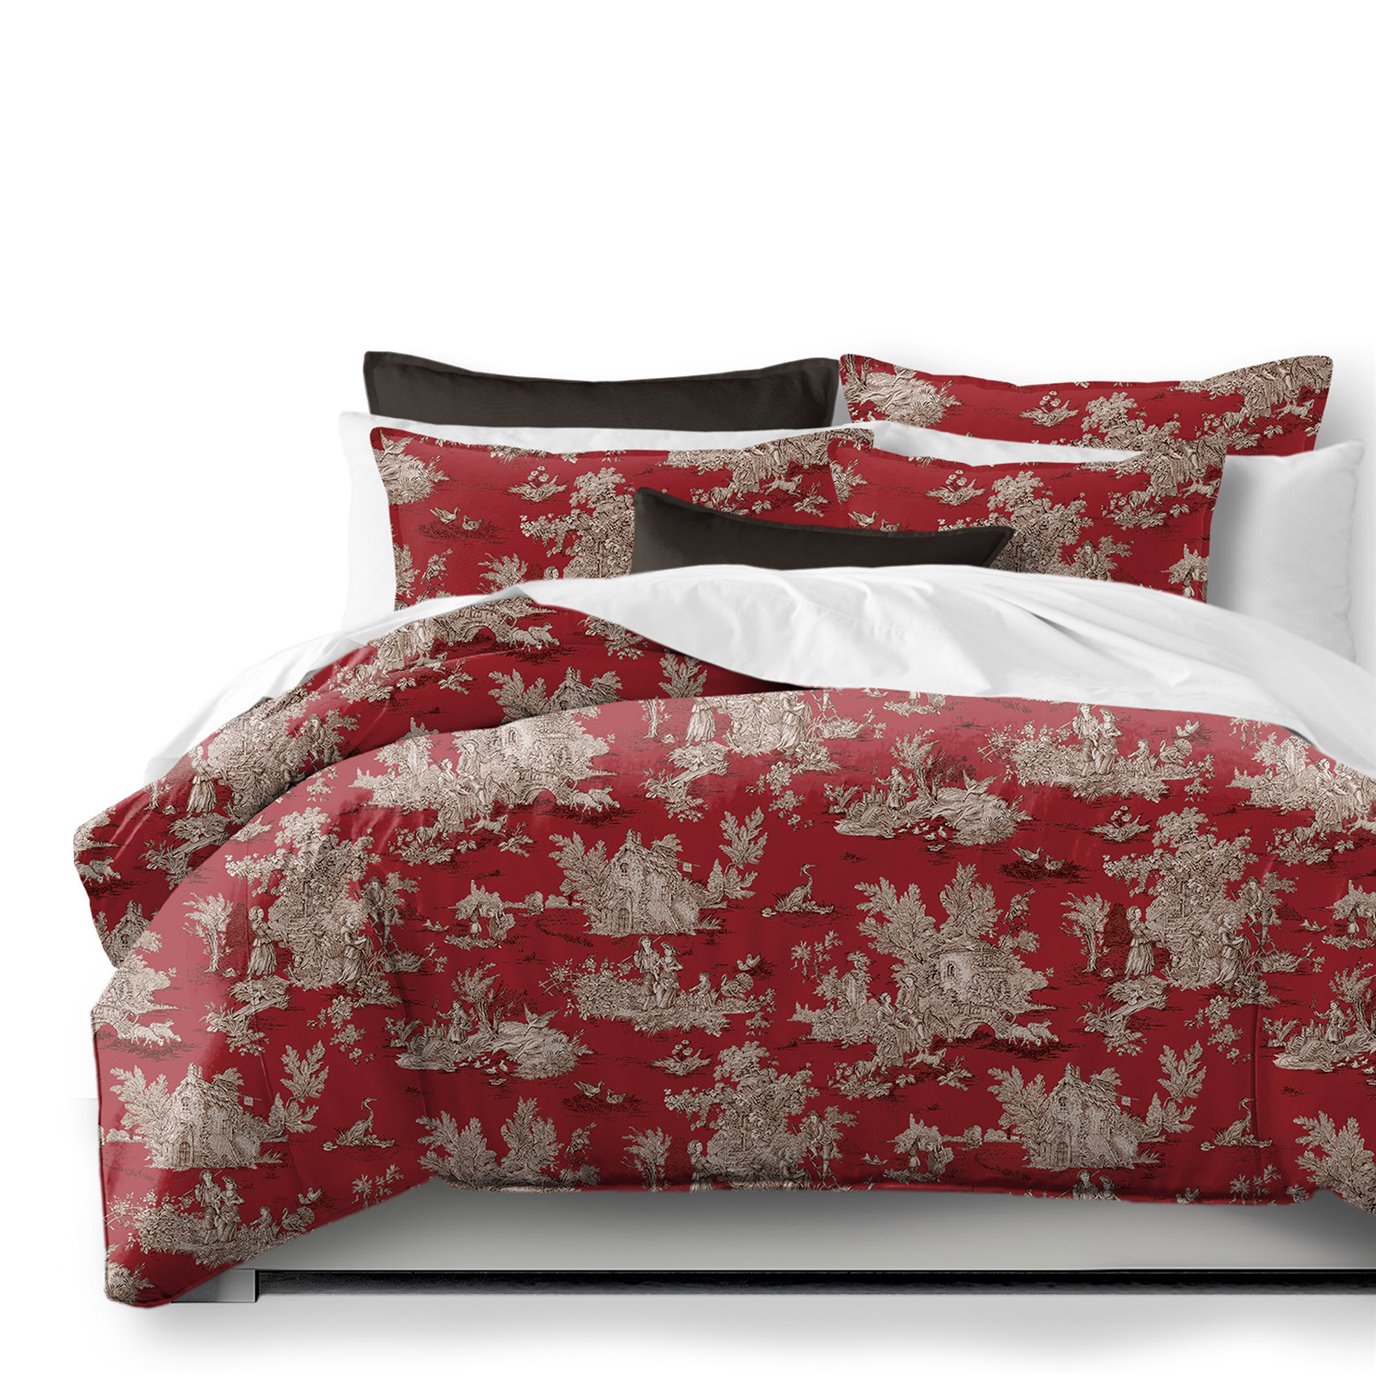 Chateau Red/Black Coverlet and Pillow Sham(s) Set - Size Super King